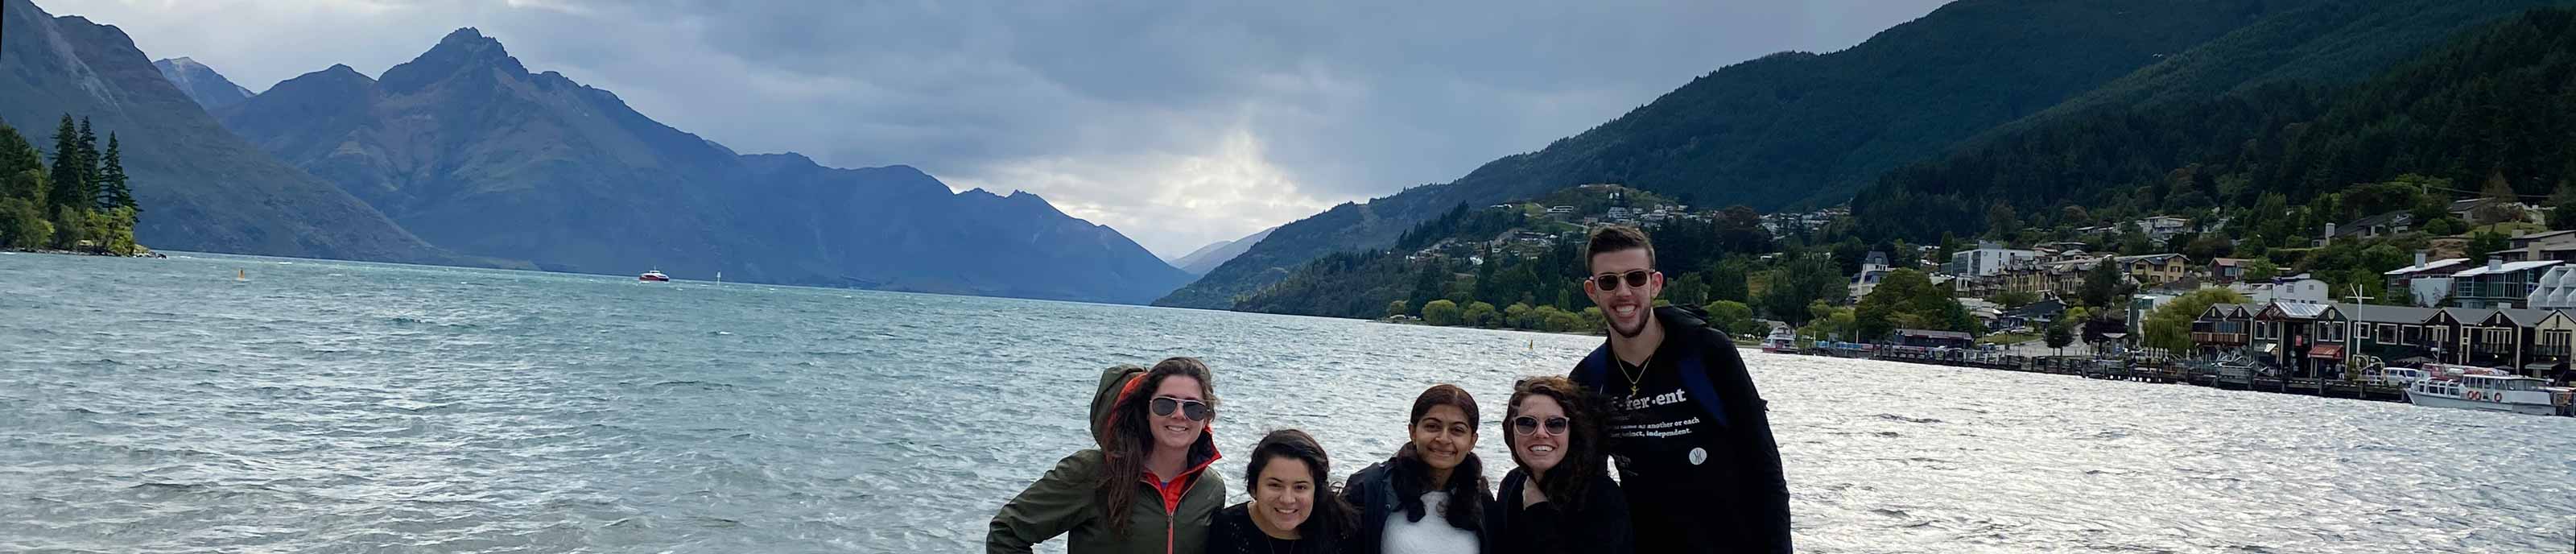 A study abroad group posing for a photo on a beach in New Zealand